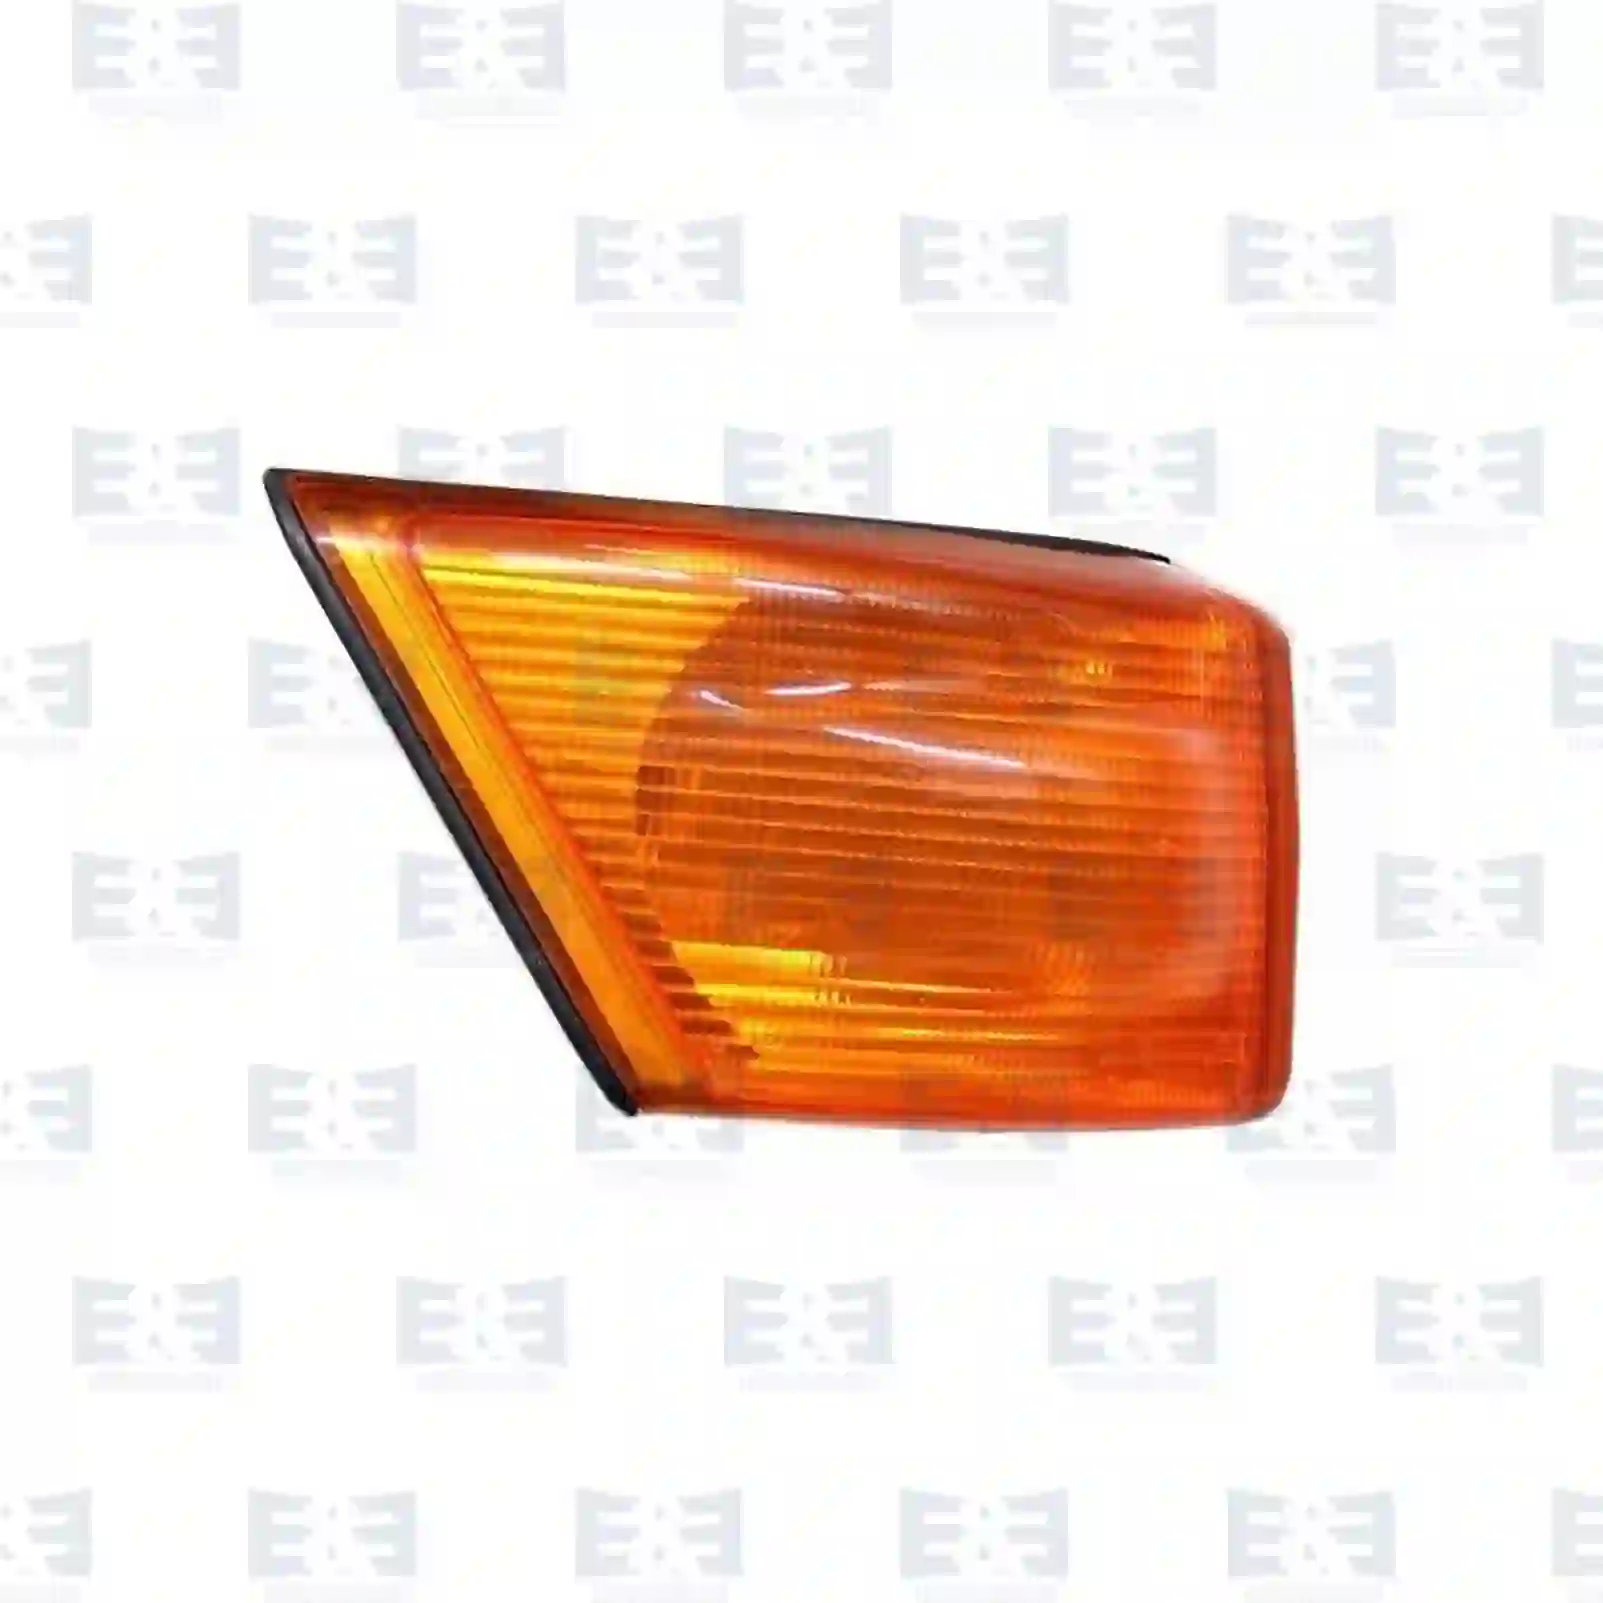 Turn signal lamp, right, without bulb, 2E2290076, 500320425 ||  2E2290076 E&E Truck Spare Parts | Truck Spare Parts, Auotomotive Spare Parts Turn signal lamp, right, without bulb, 2E2290076, 500320425 ||  2E2290076 E&E Truck Spare Parts | Truck Spare Parts, Auotomotive Spare Parts